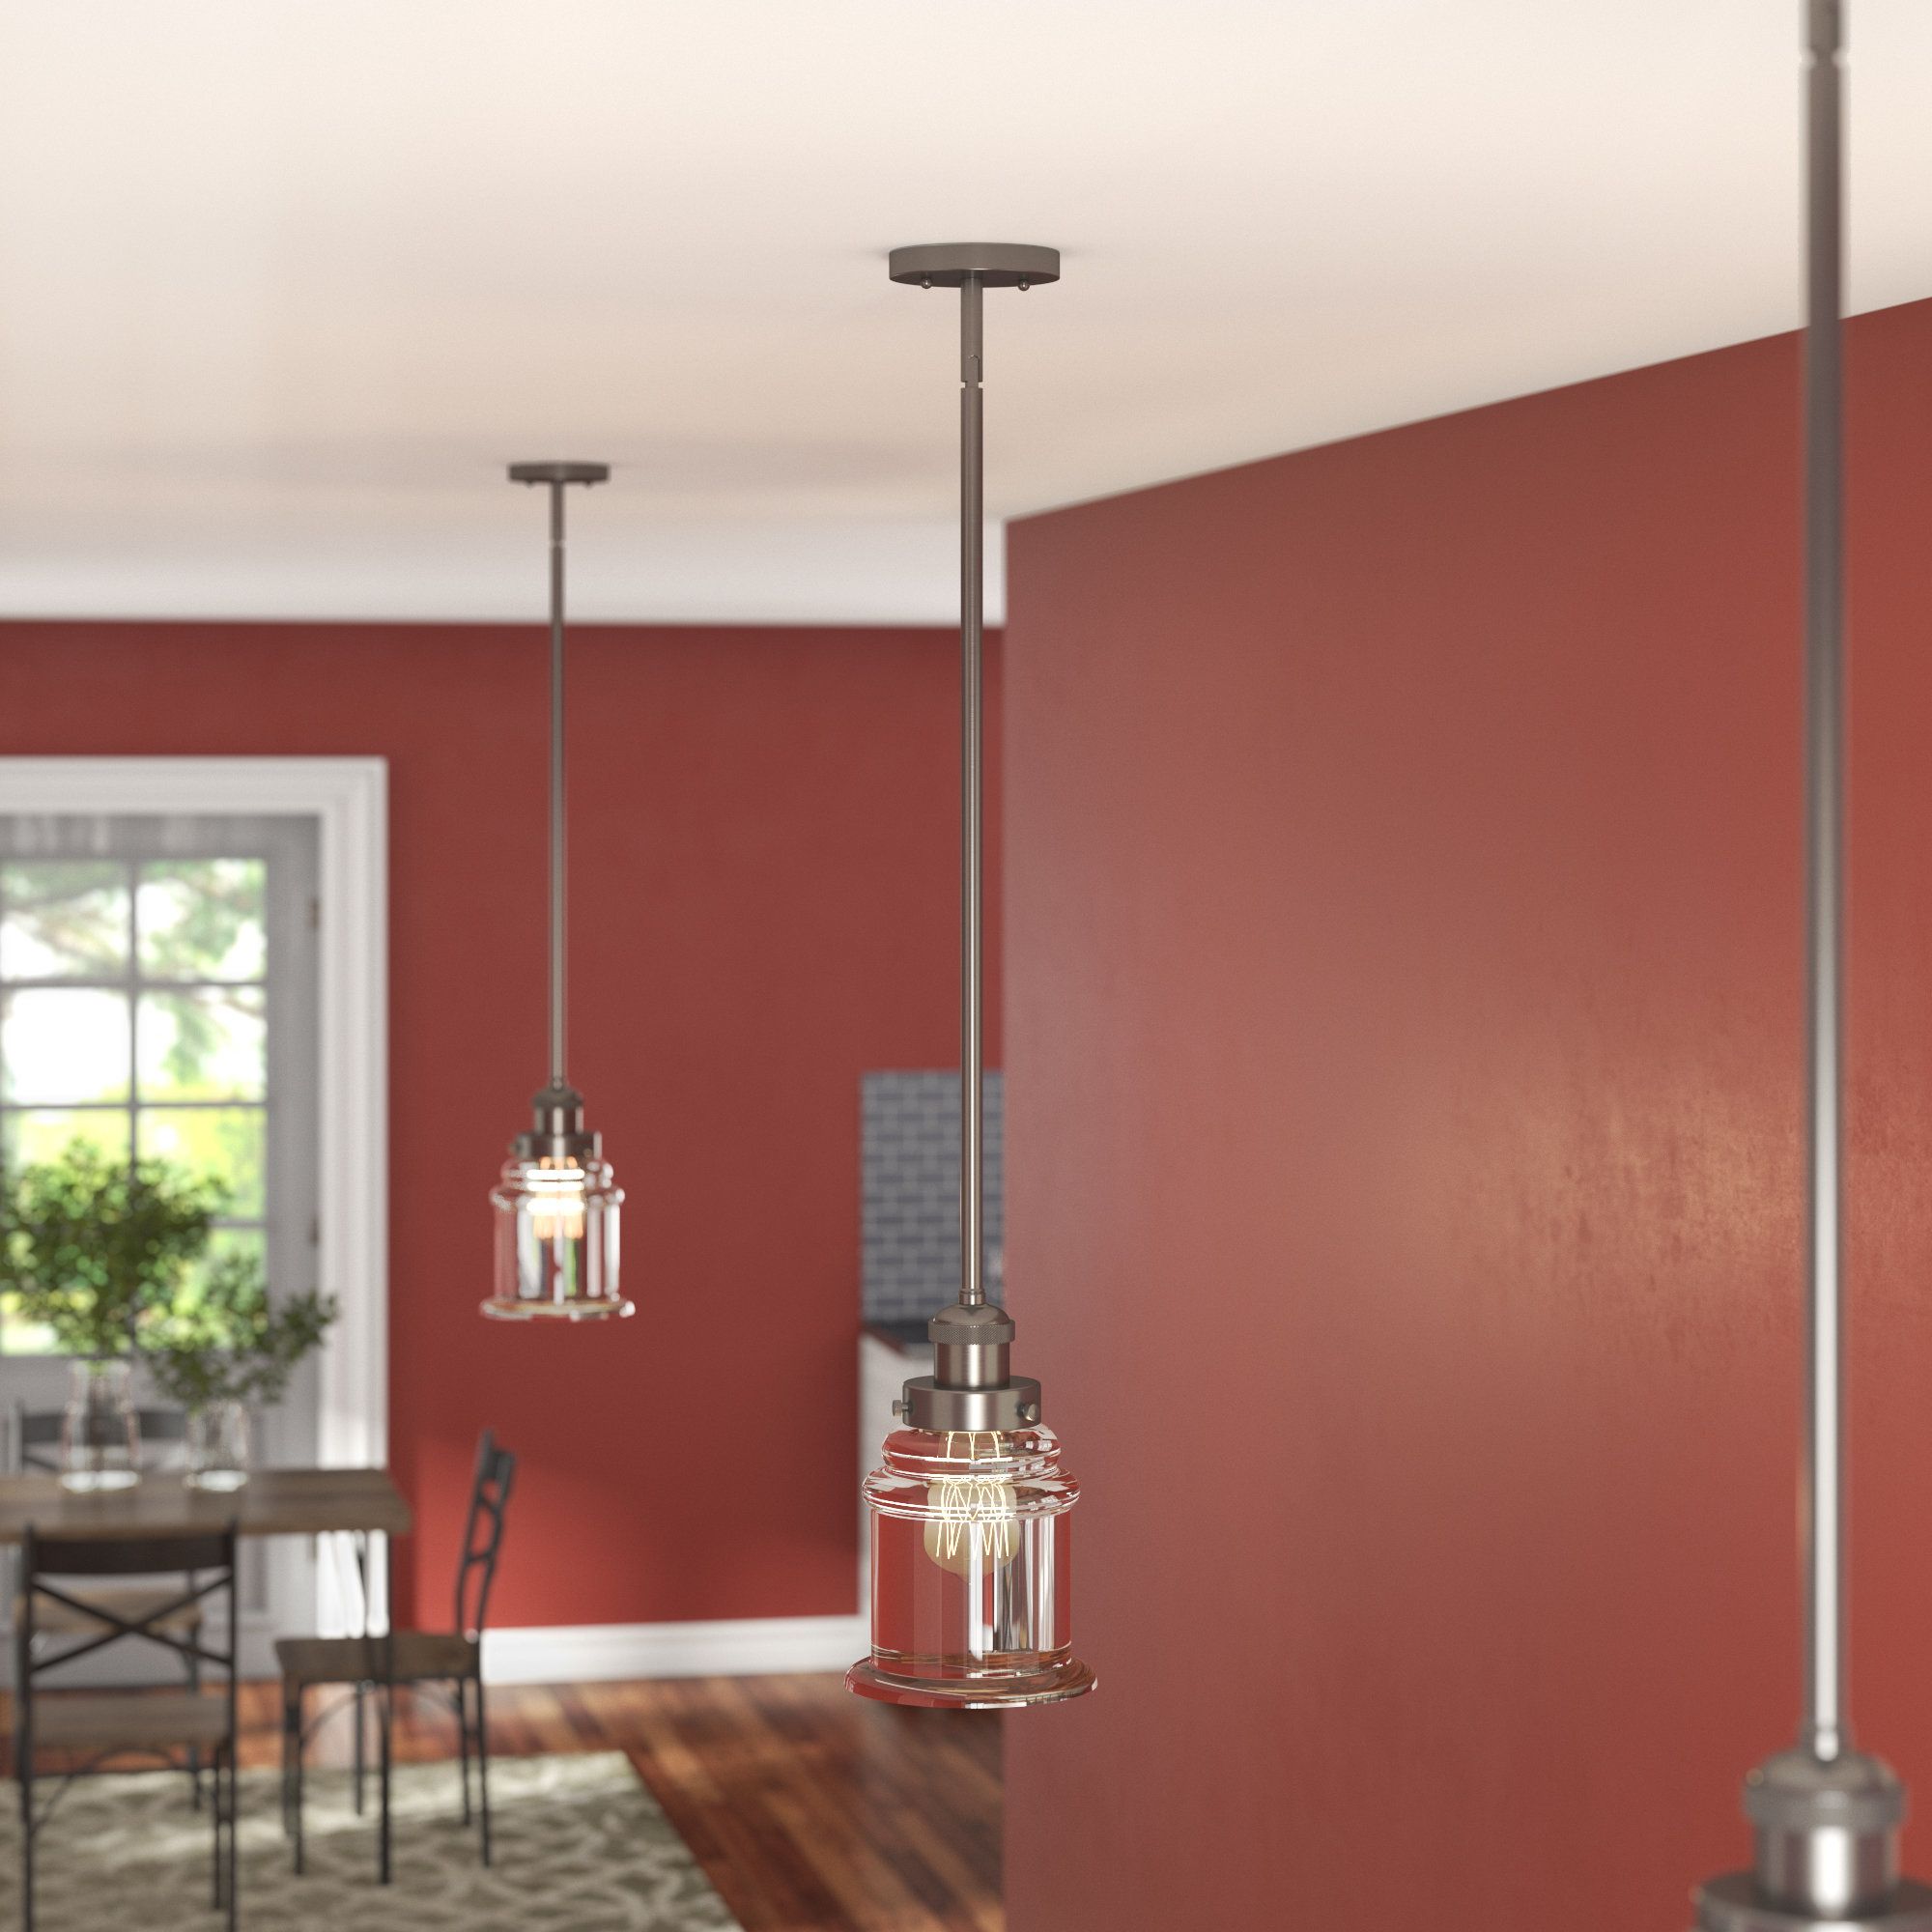 Bell Shaped Pendant Light You'll Love In 2019 | Wayfair In Terry 1 Light Single Bell Pendants (View 27 of 30)